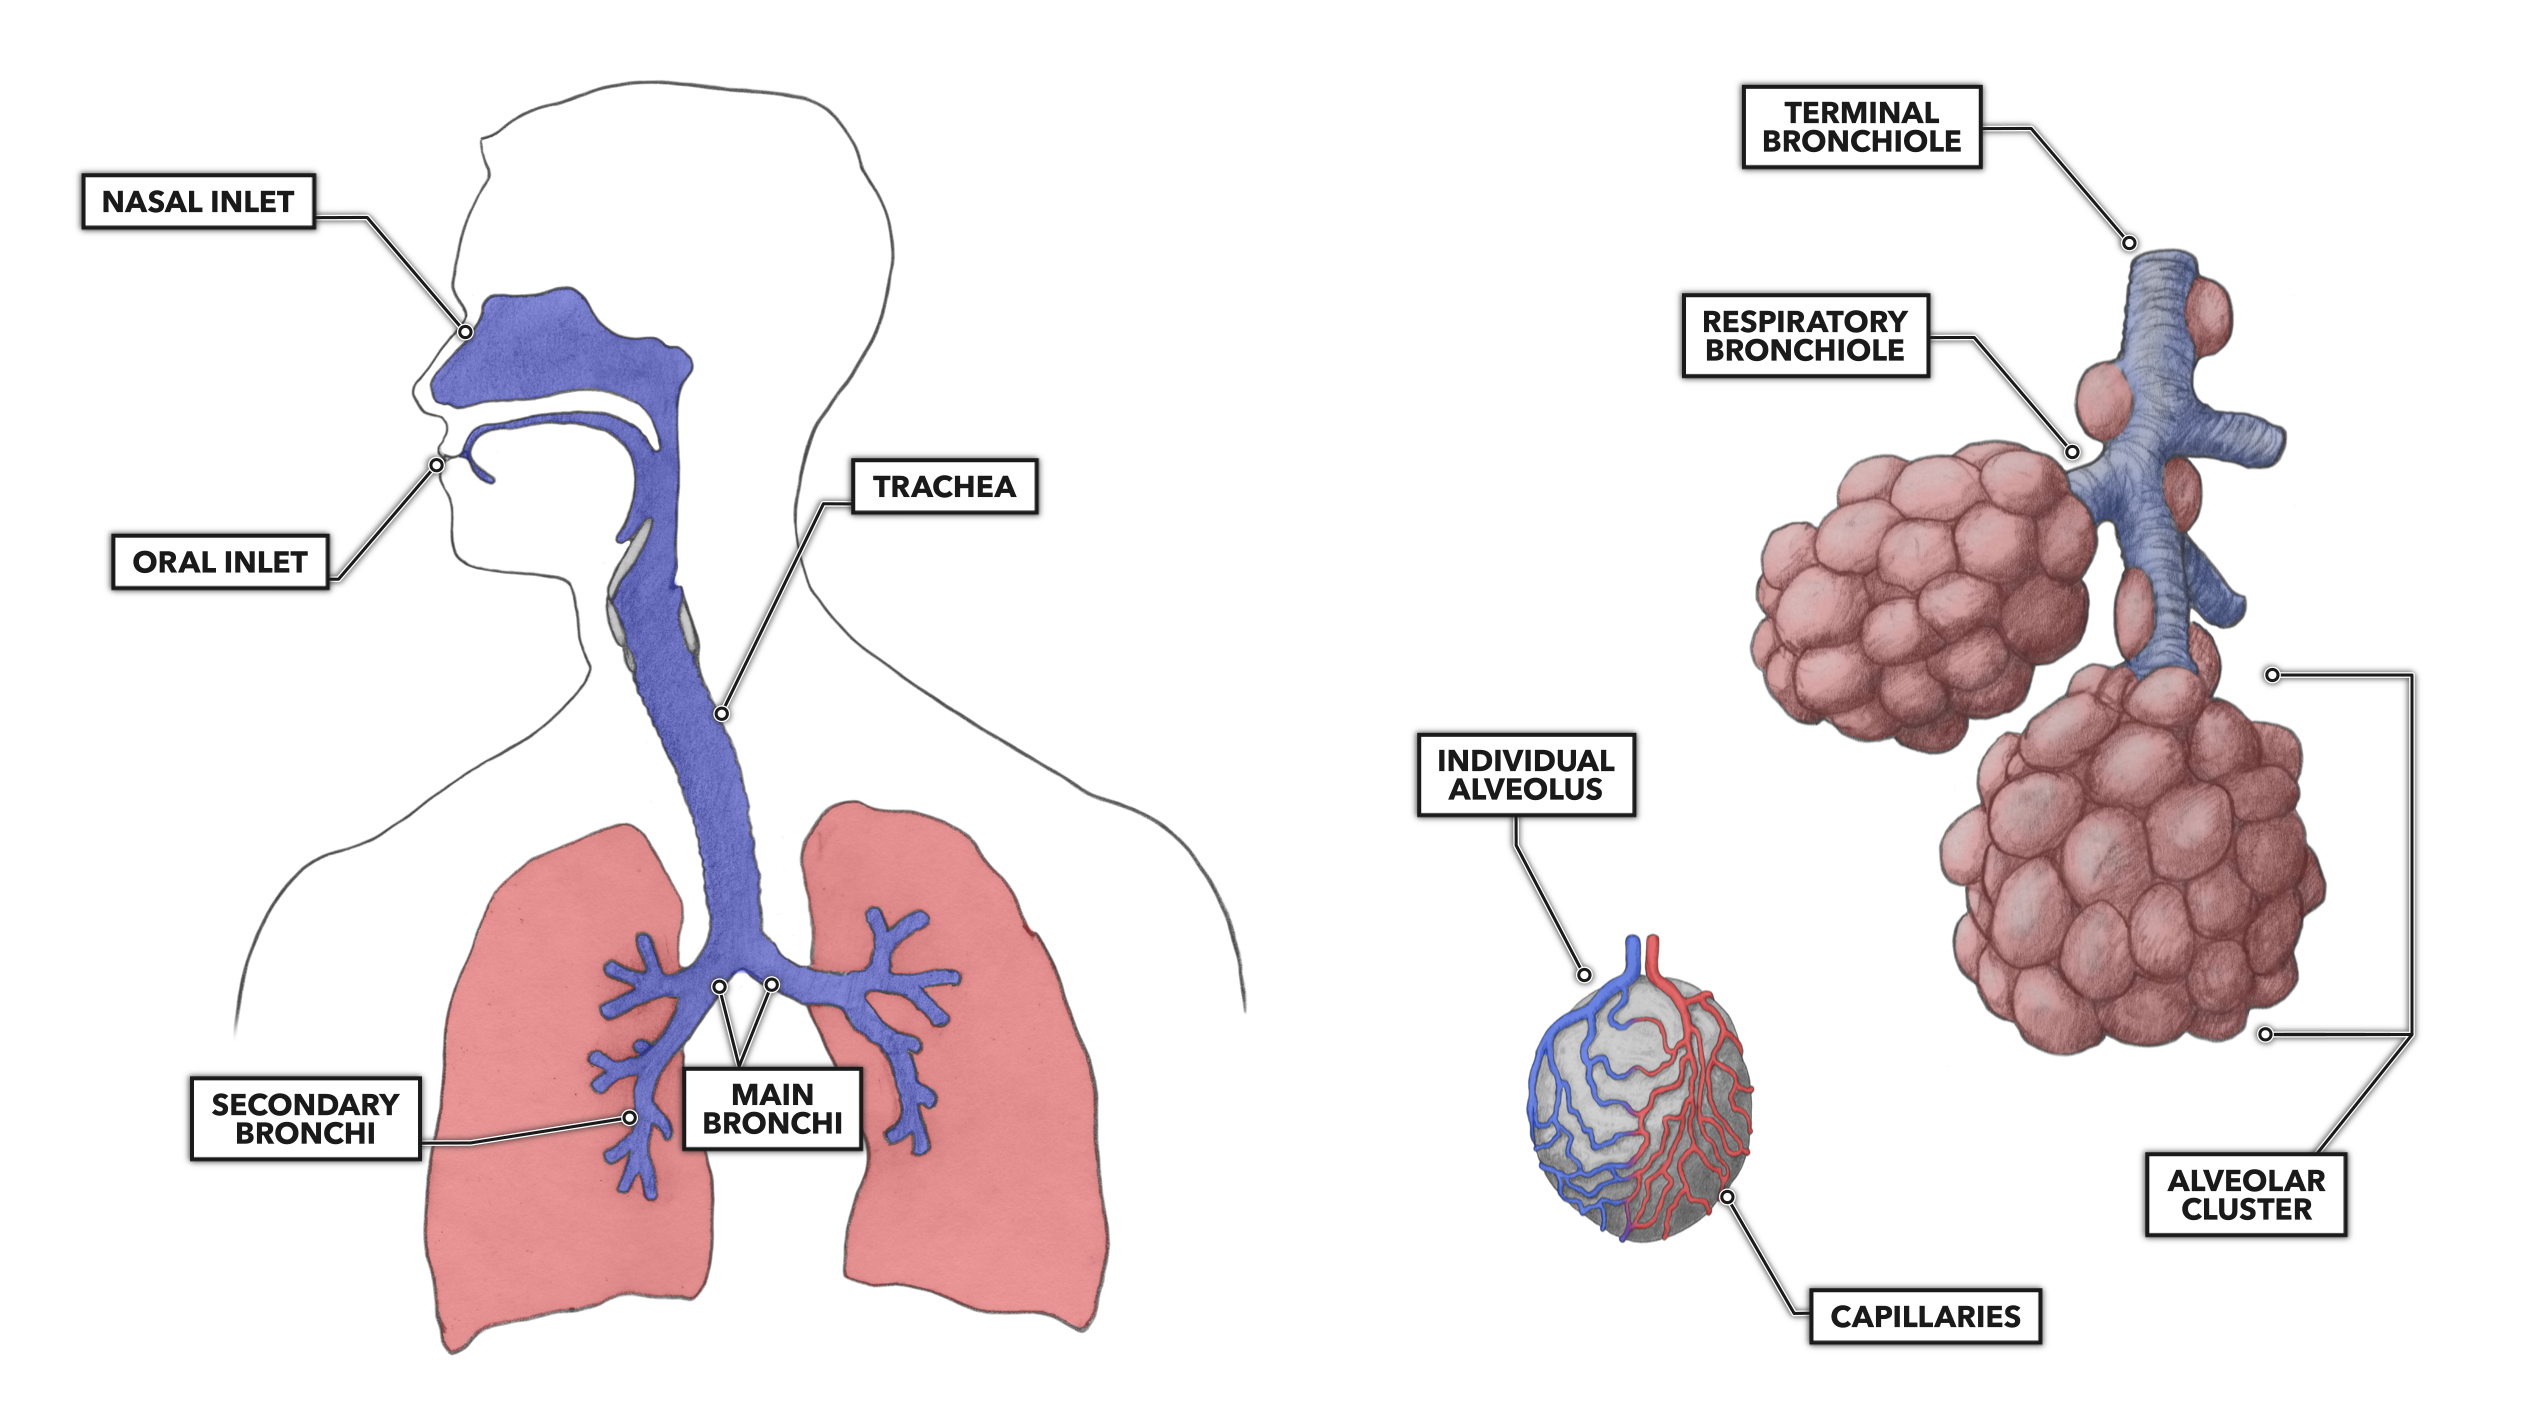 CrossFit | Lung Anatomy: The Airway and Alveoli